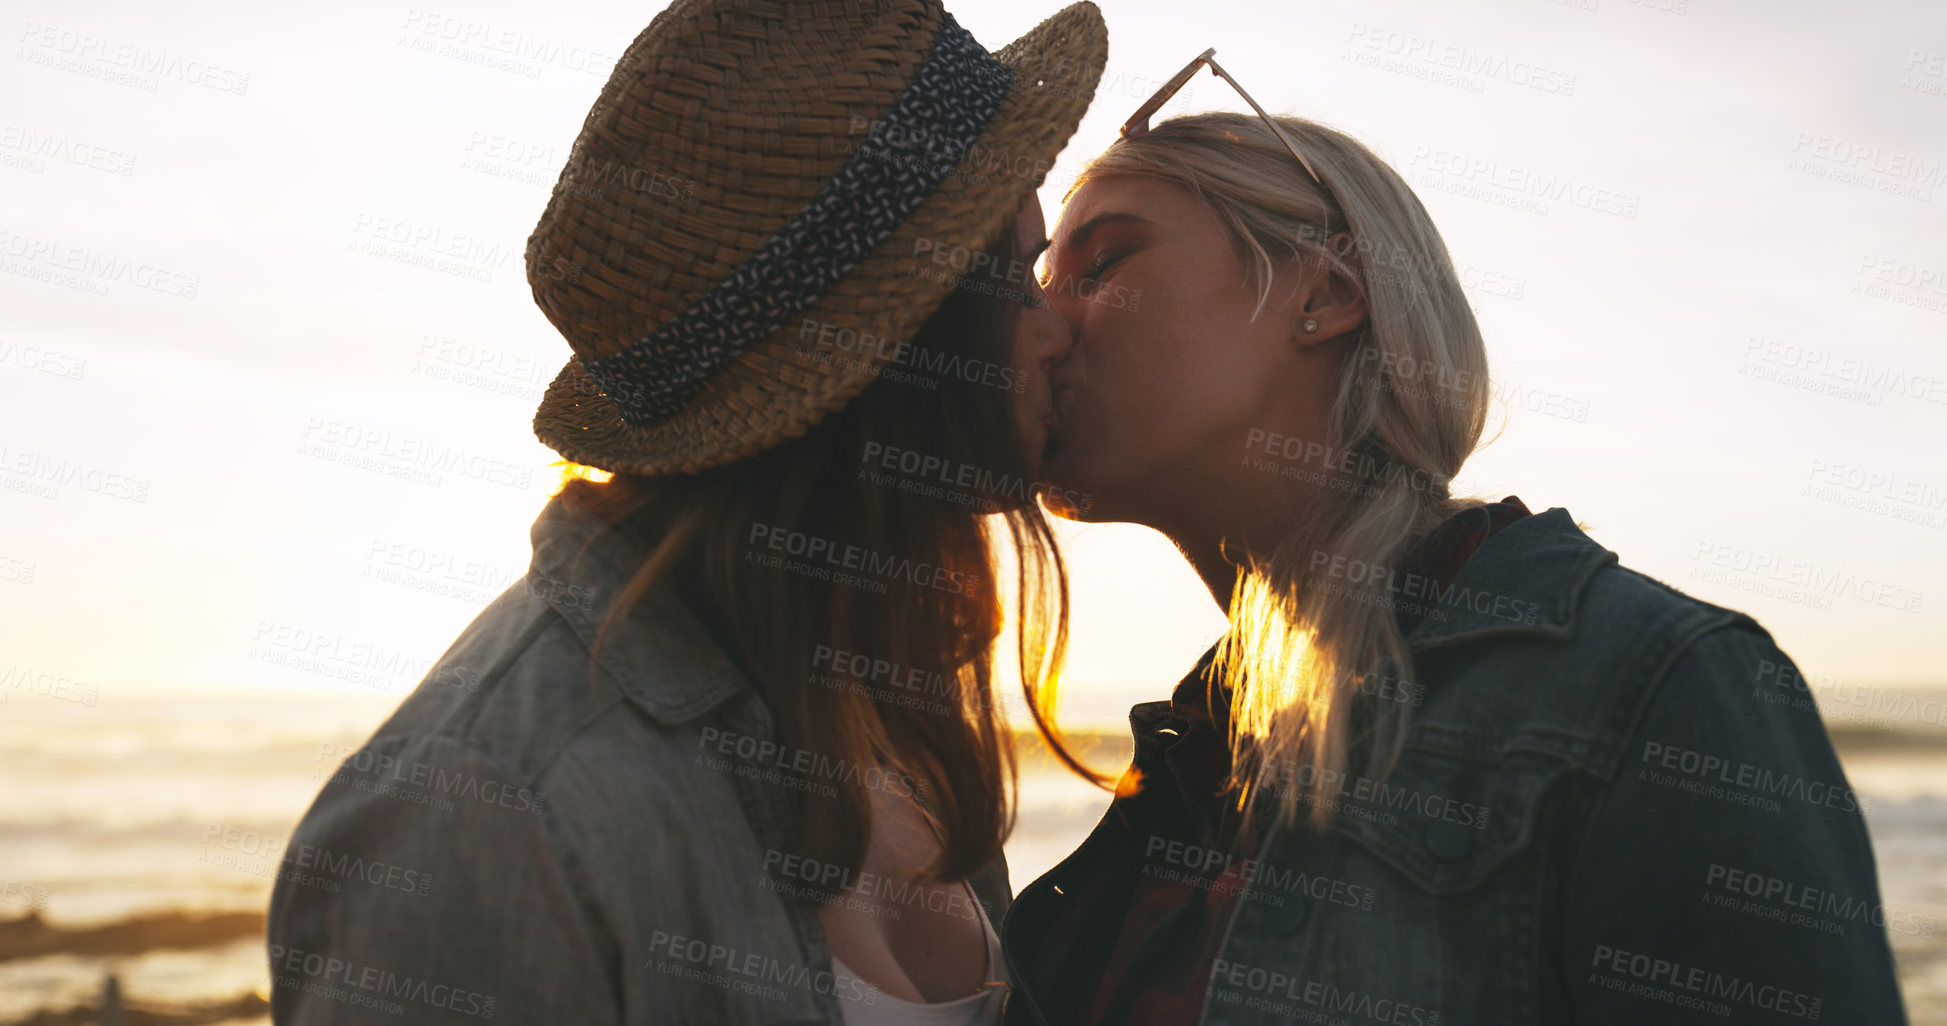 Buy stock photo Shot of an affectionate and happy young couple kissing while spending the day together outdoors near the beach